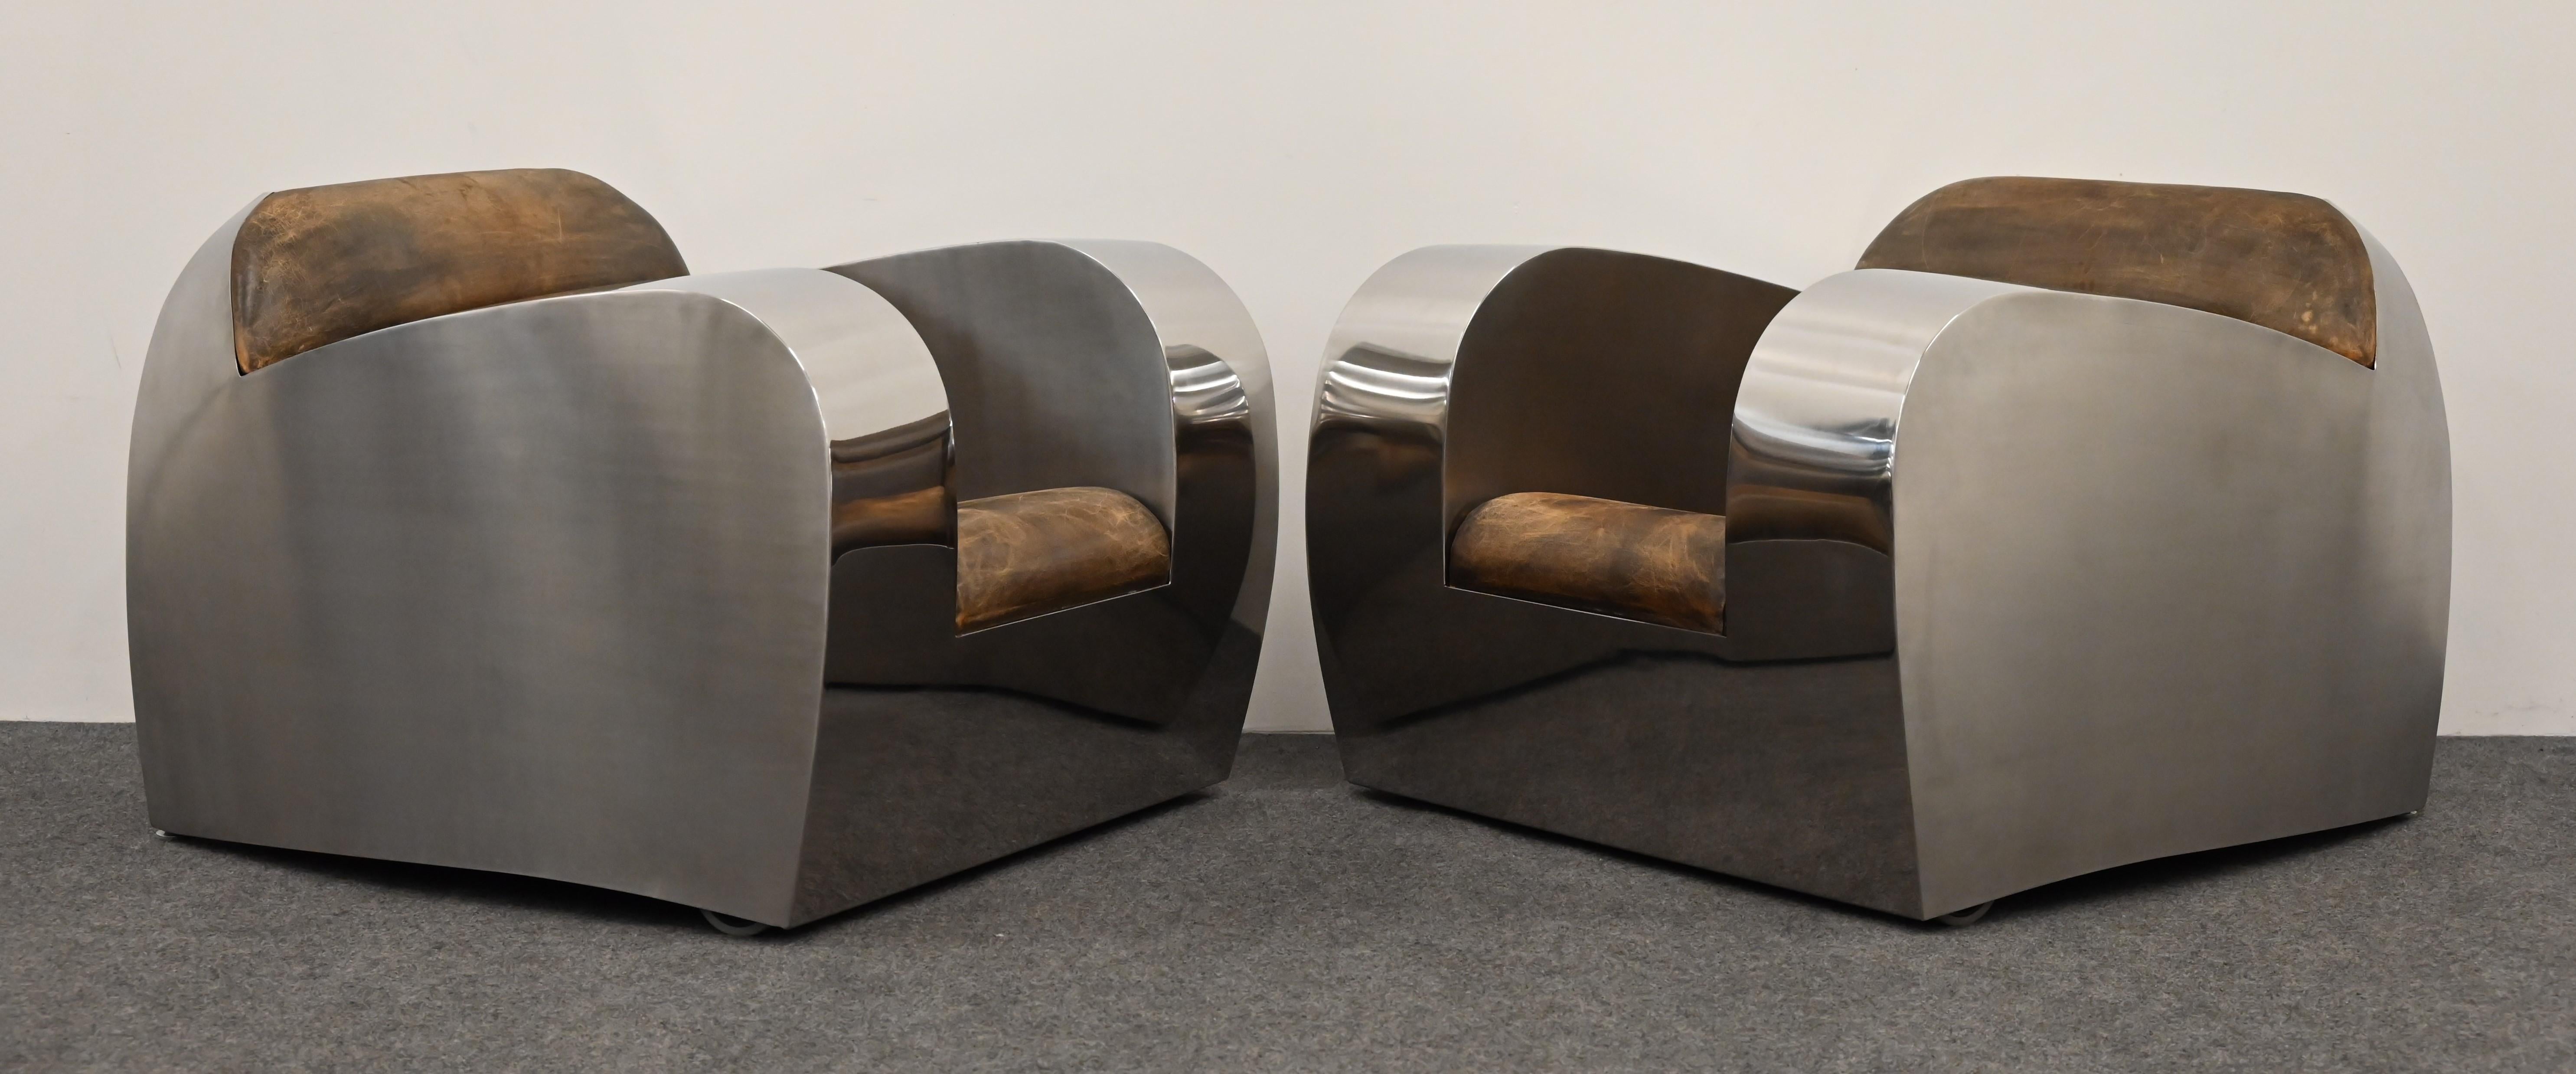 Late 20th Century Pair of Stainless Steel Club Chairs by Jonathan Singleton, 20th Century For Sale